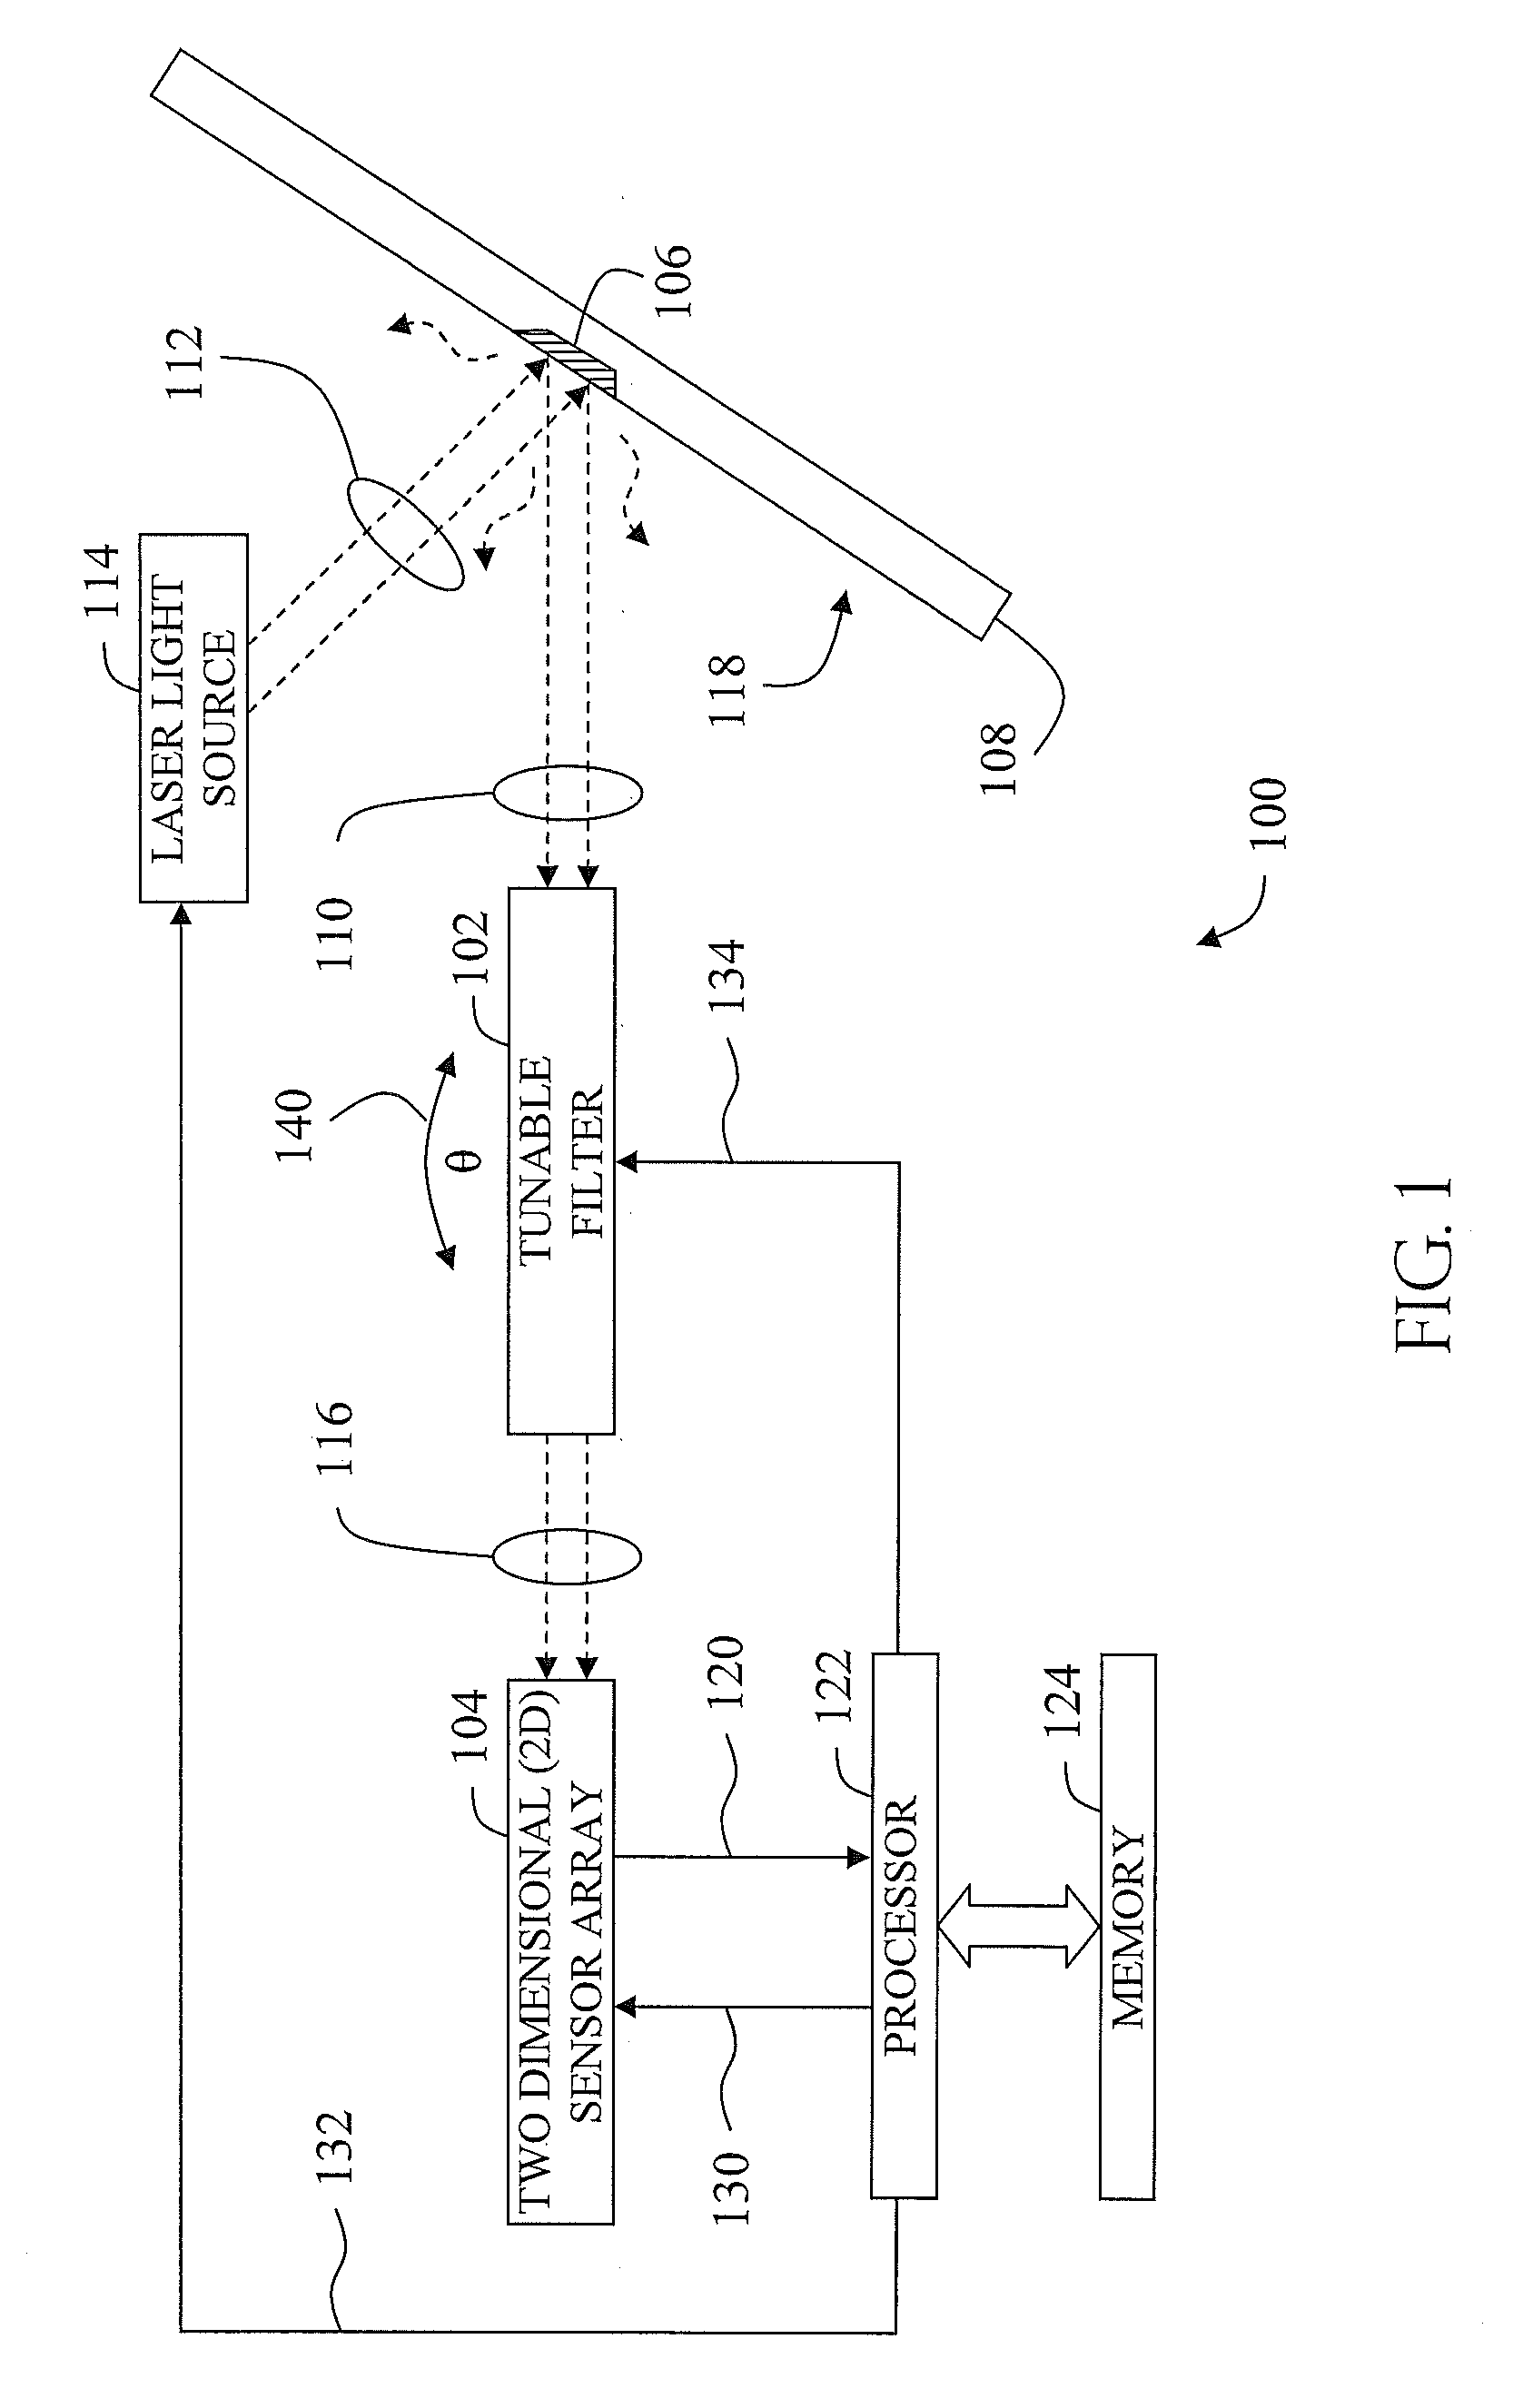 Spectral imaging device